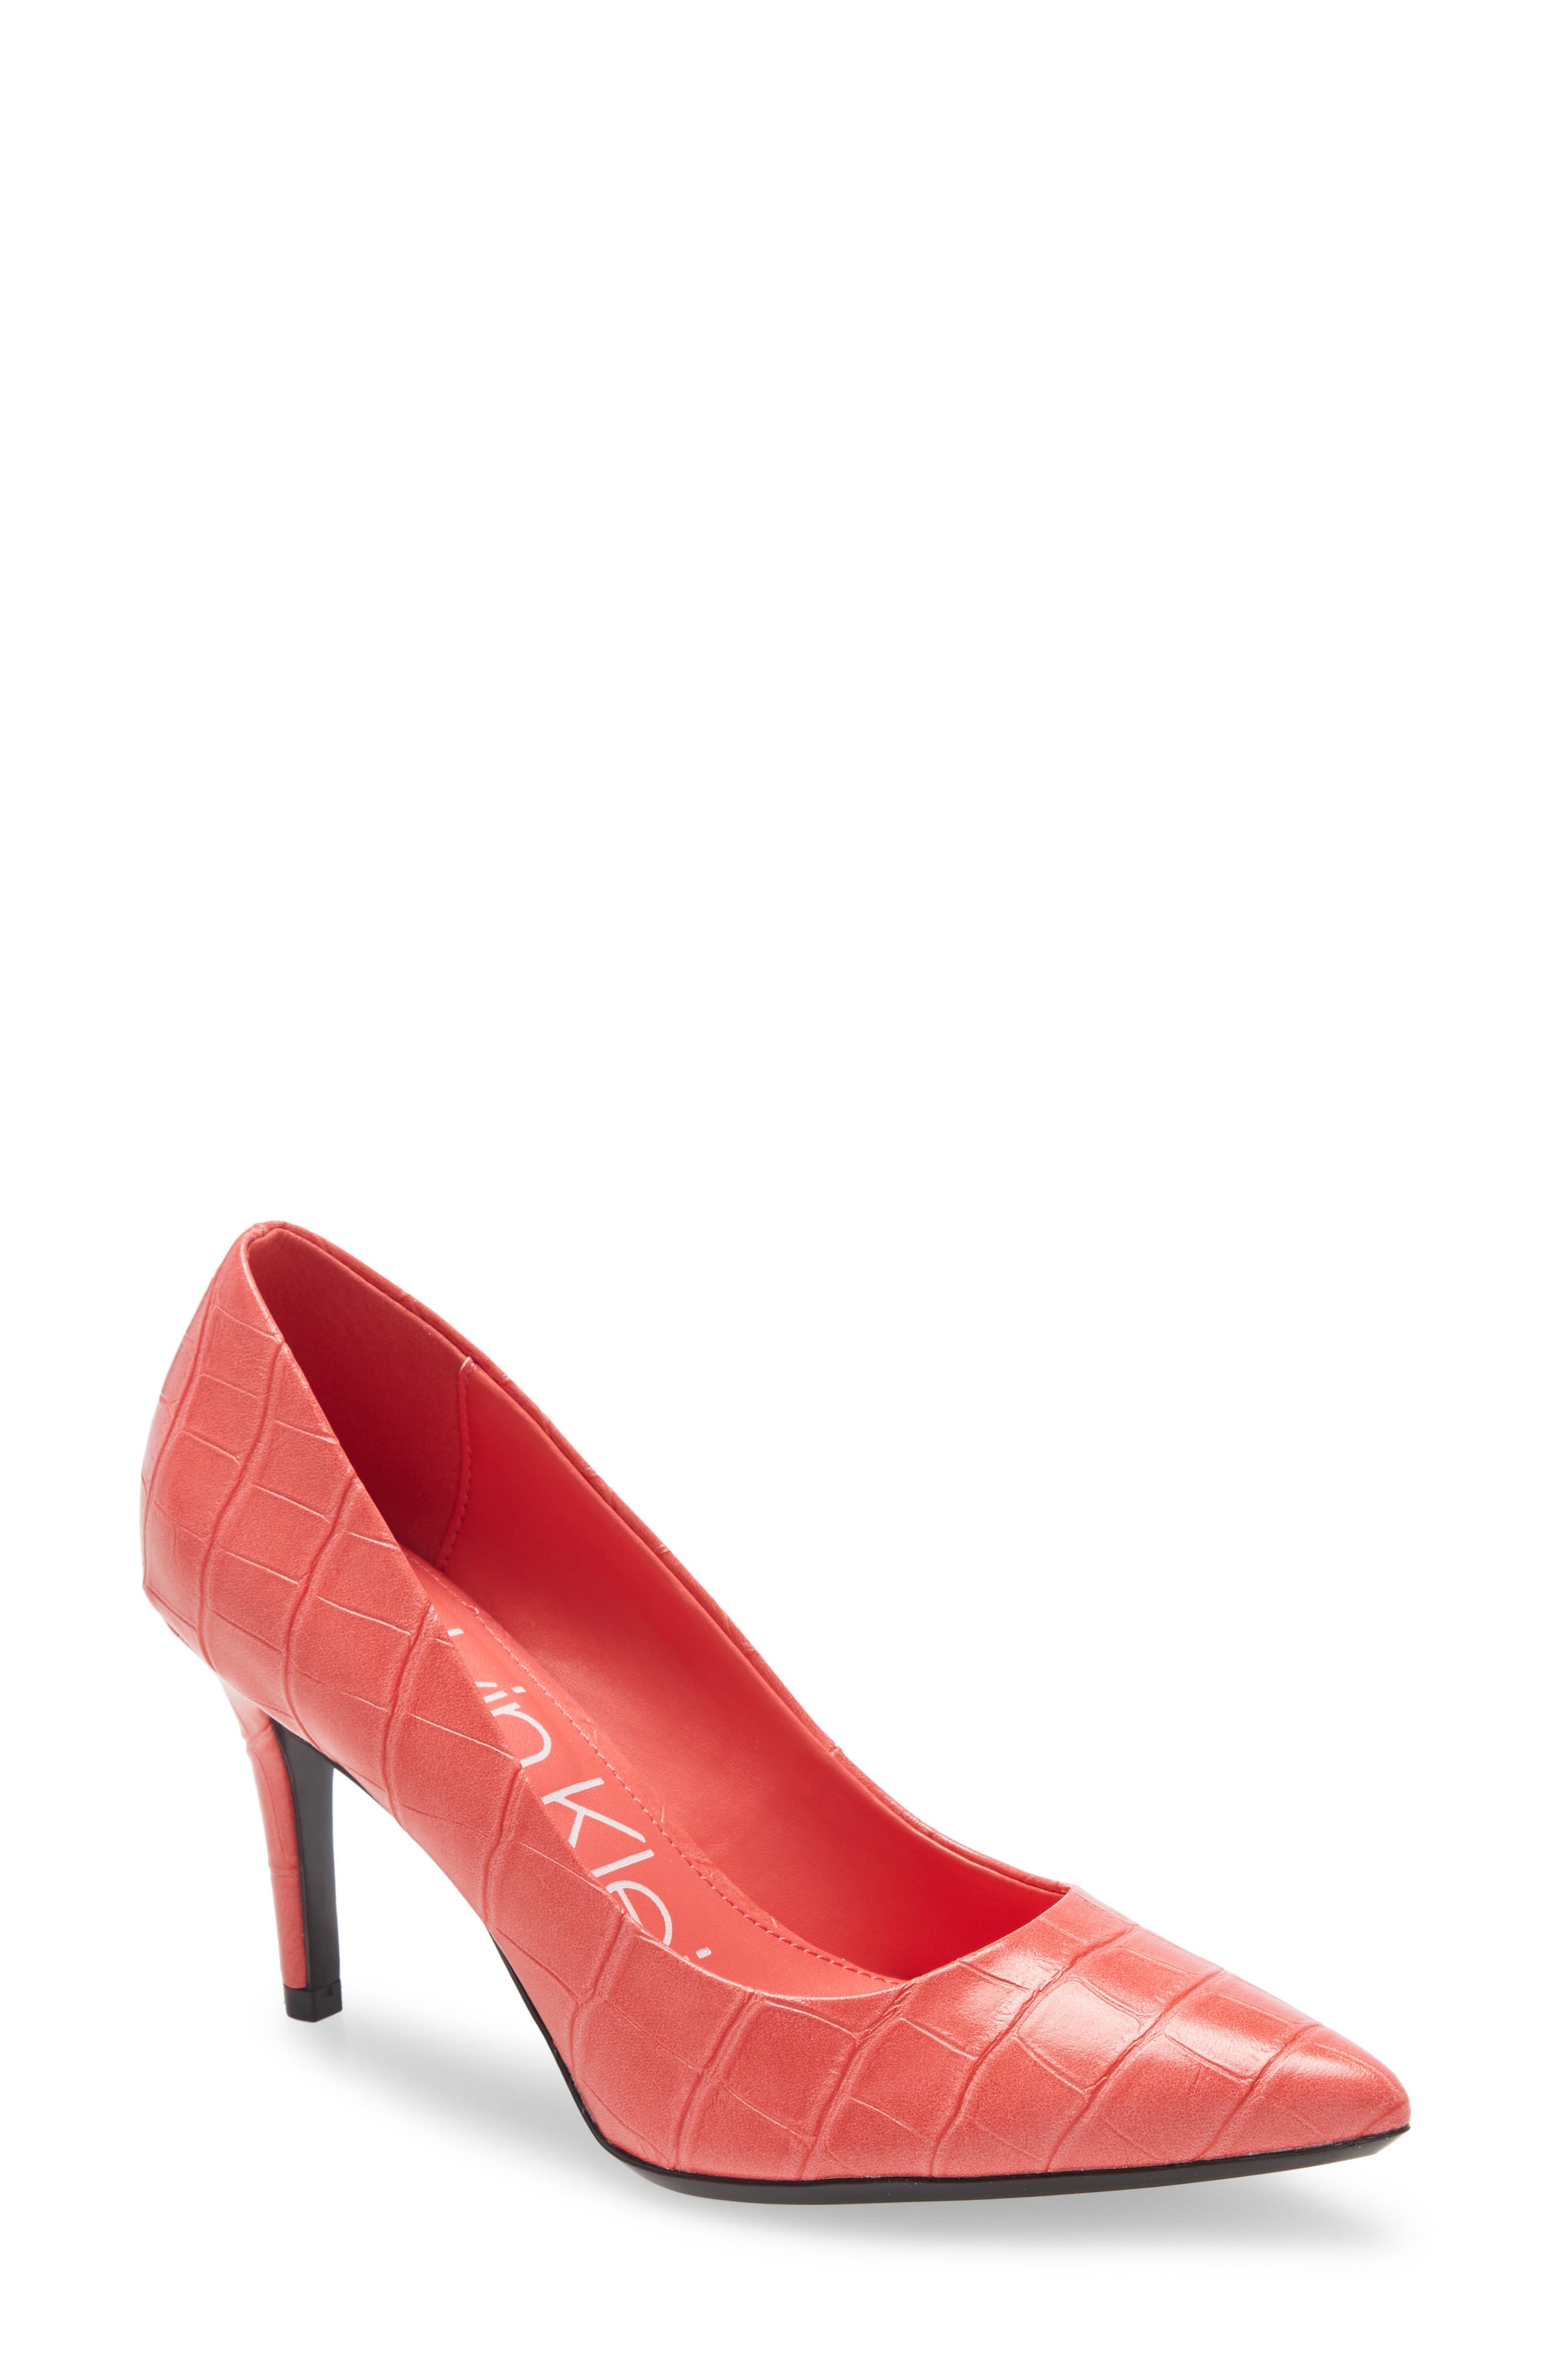 UPC 194060359533 product image for Women's Calvin Klein Gayle Pointed Toe Pump, Size 9 M - Coral | upcitemdb.com